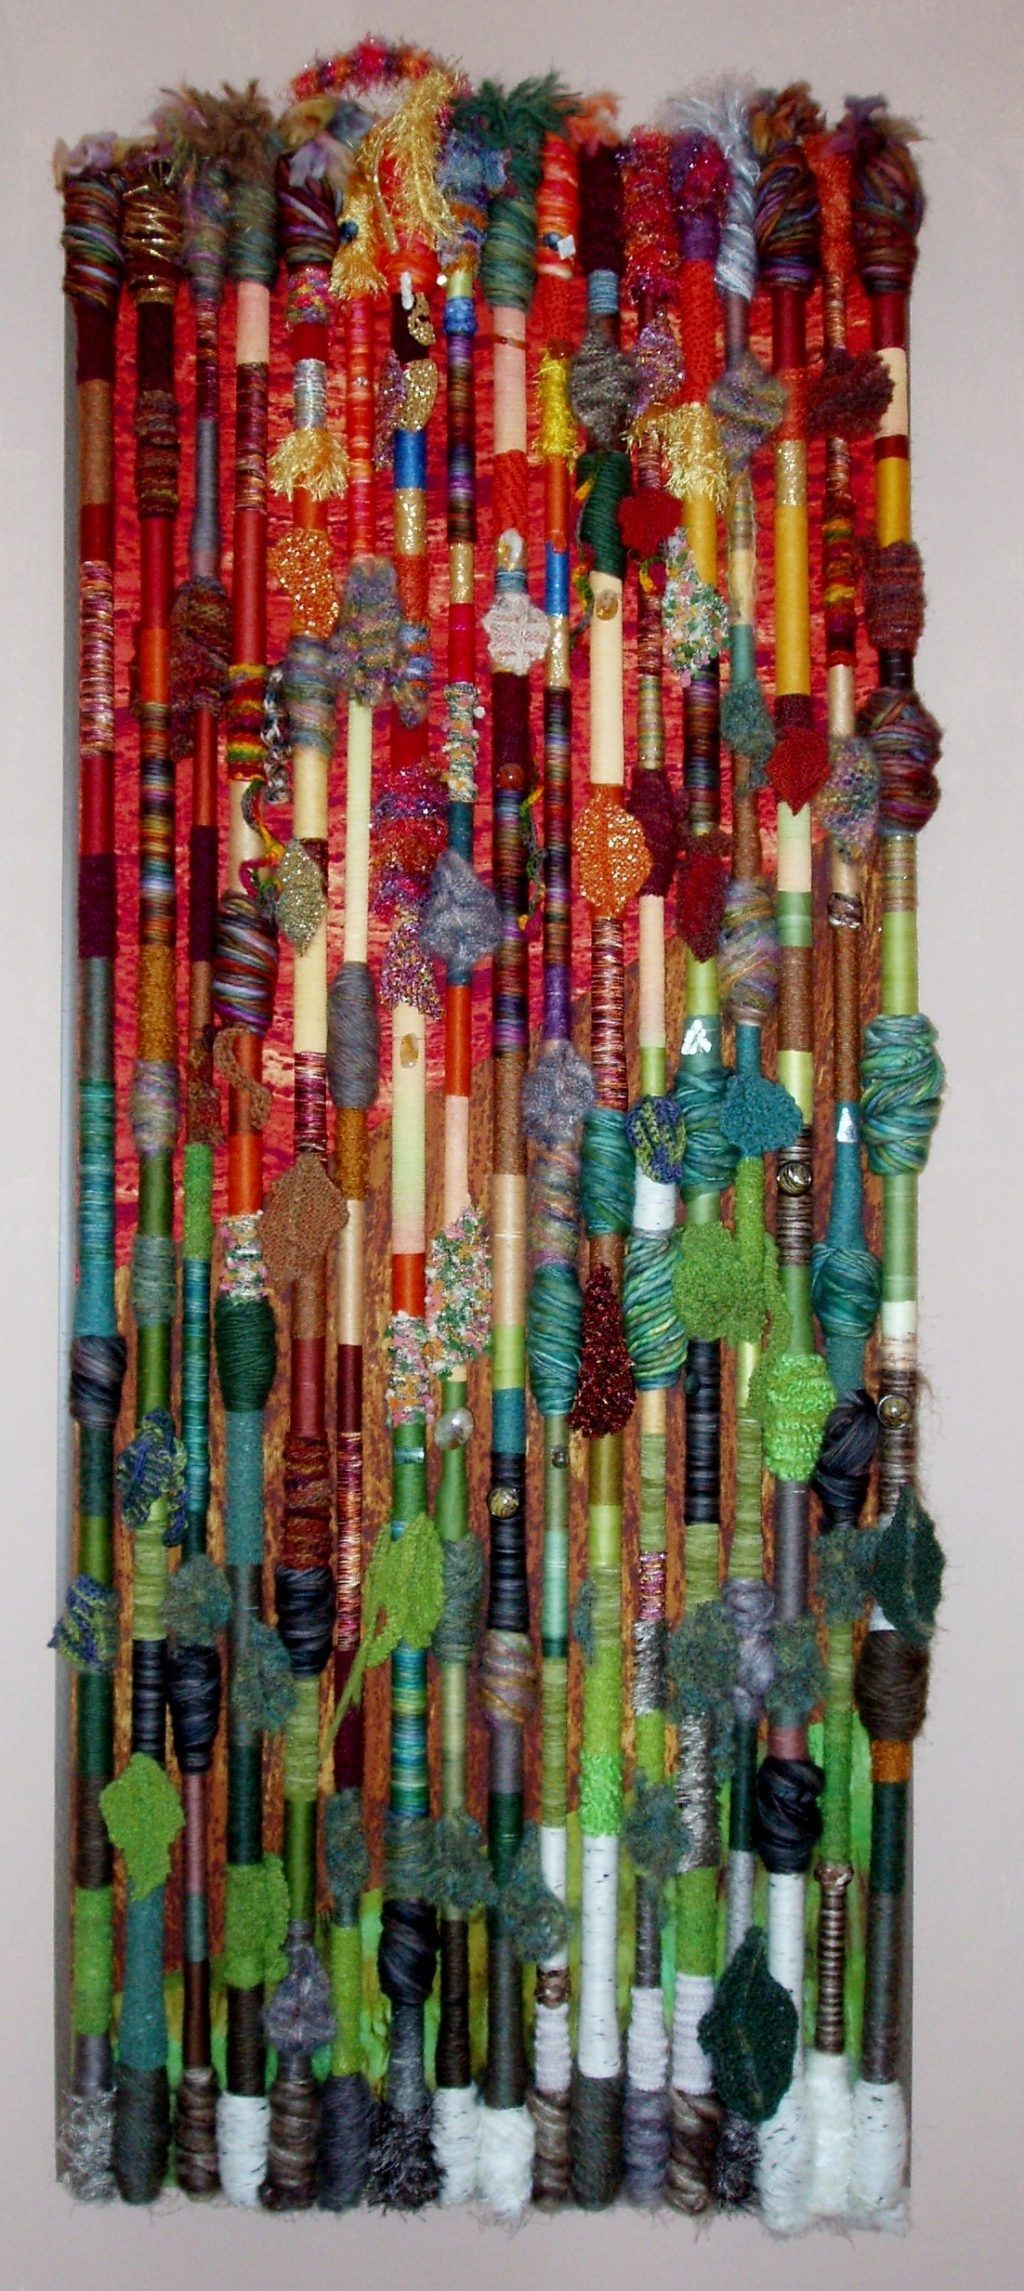 Contemporary Textile Wall Art Pertaining To Most Popular Inspirational Design Ideas Textile Wall Hangings With Fiber Art (View 2 of 15)